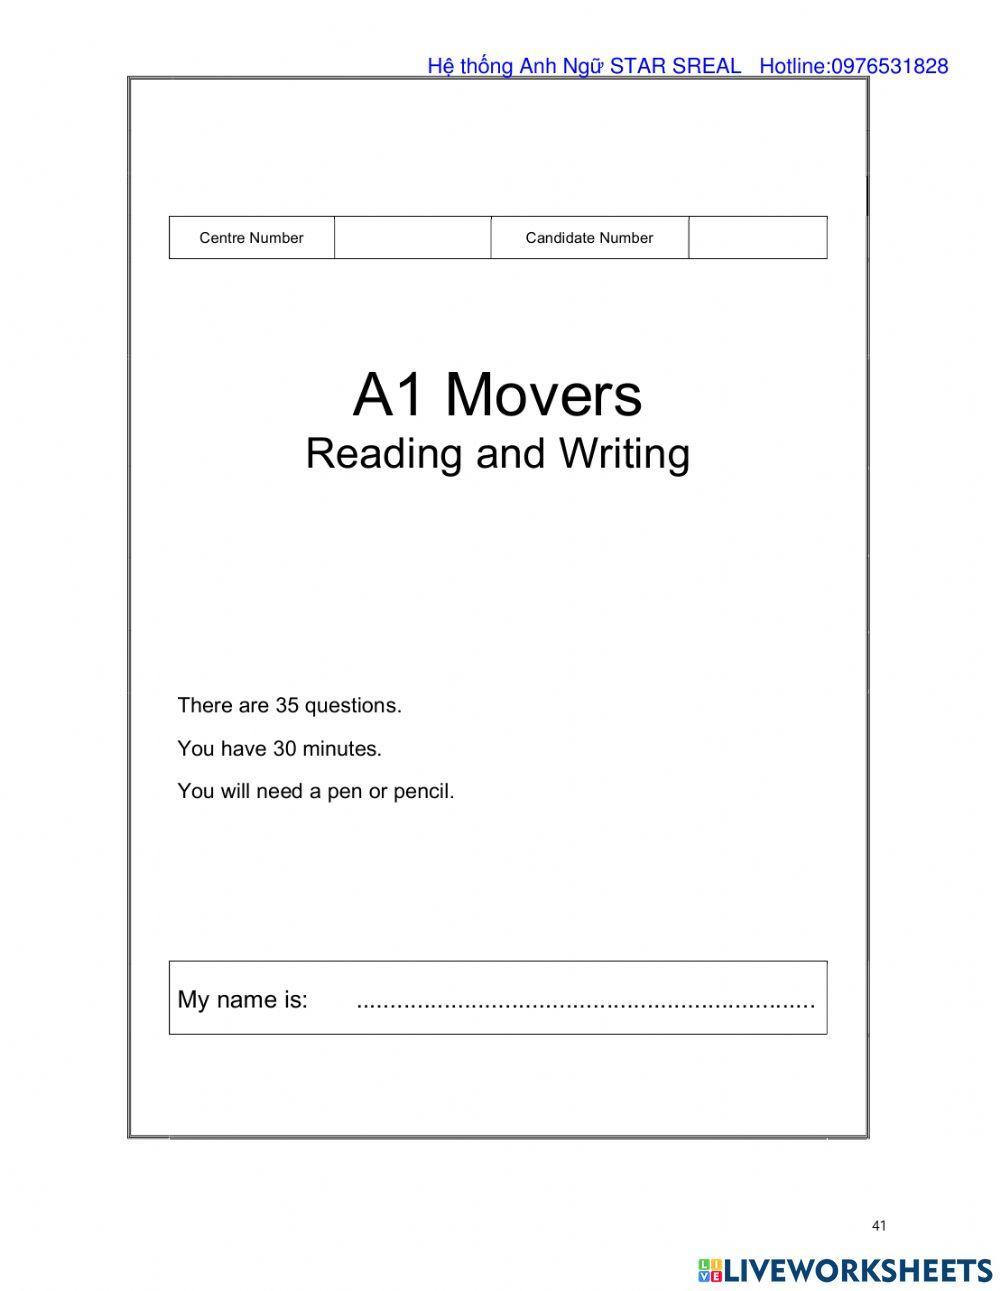 A1 Mover Reading and Writing part 2